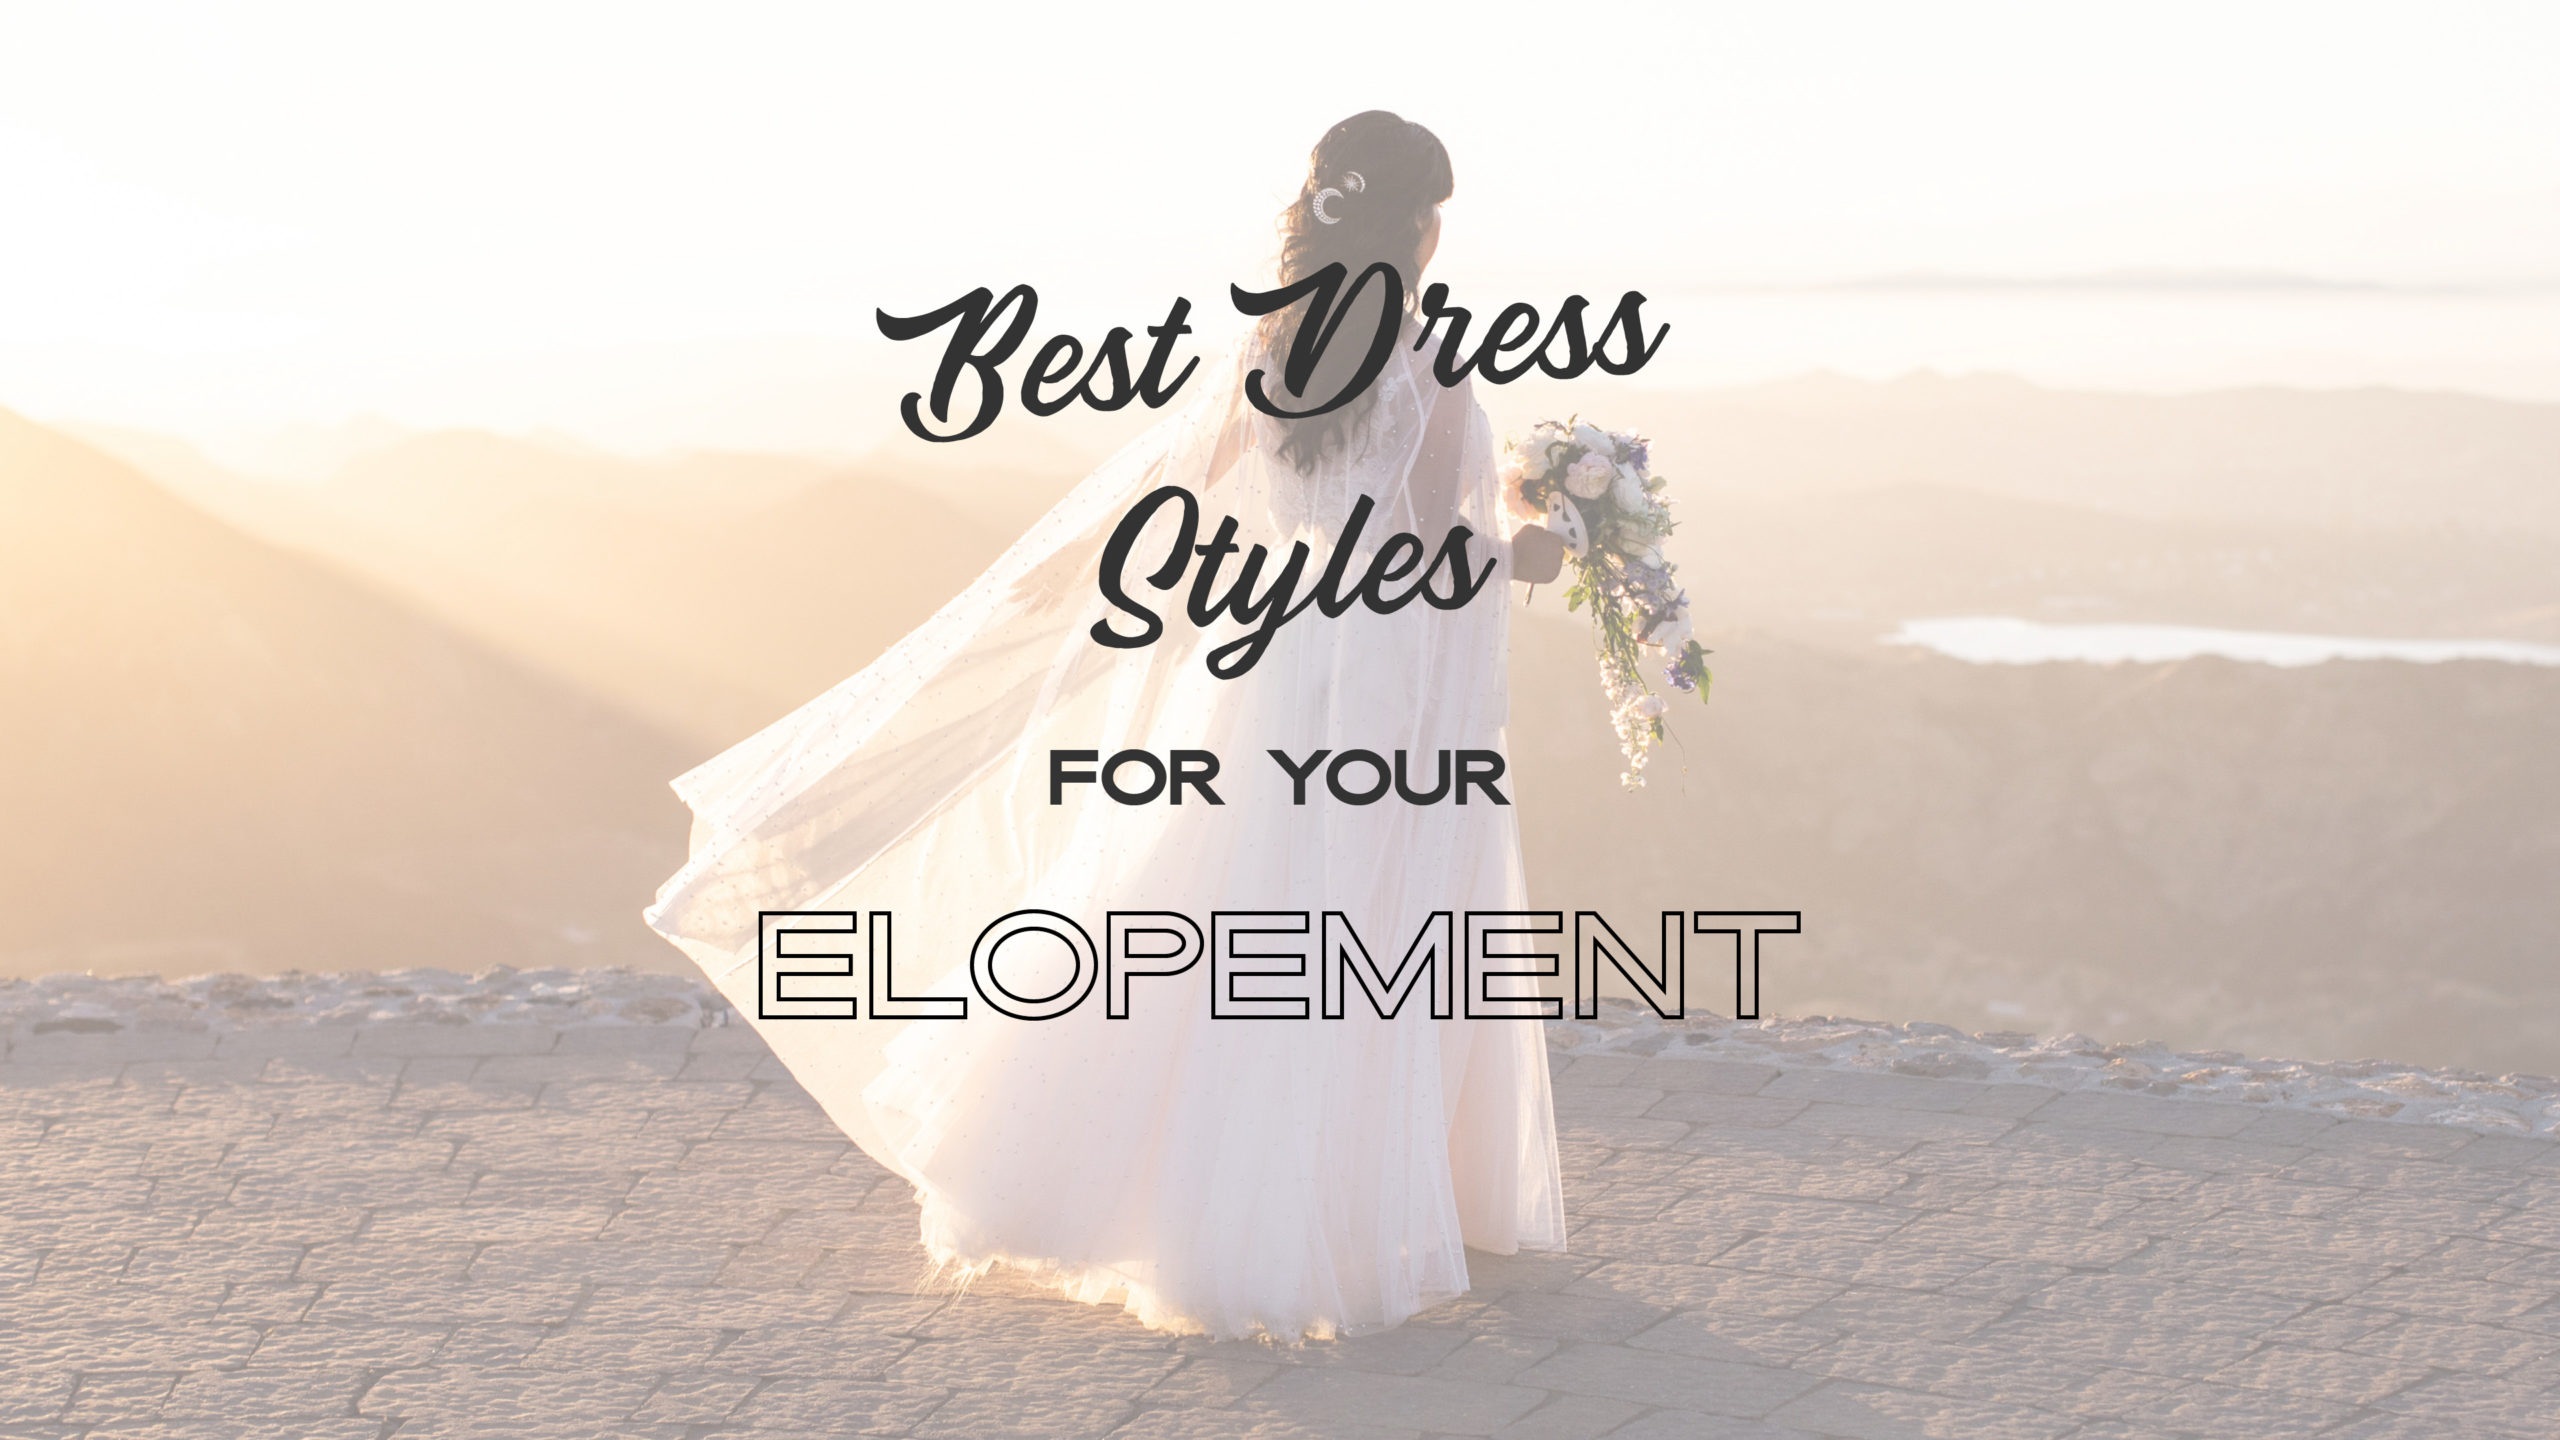 Best-Dress-Styles-scaled Elopement Dress Guide: 10 Best Dress Styles You'll Want for Your Elopement